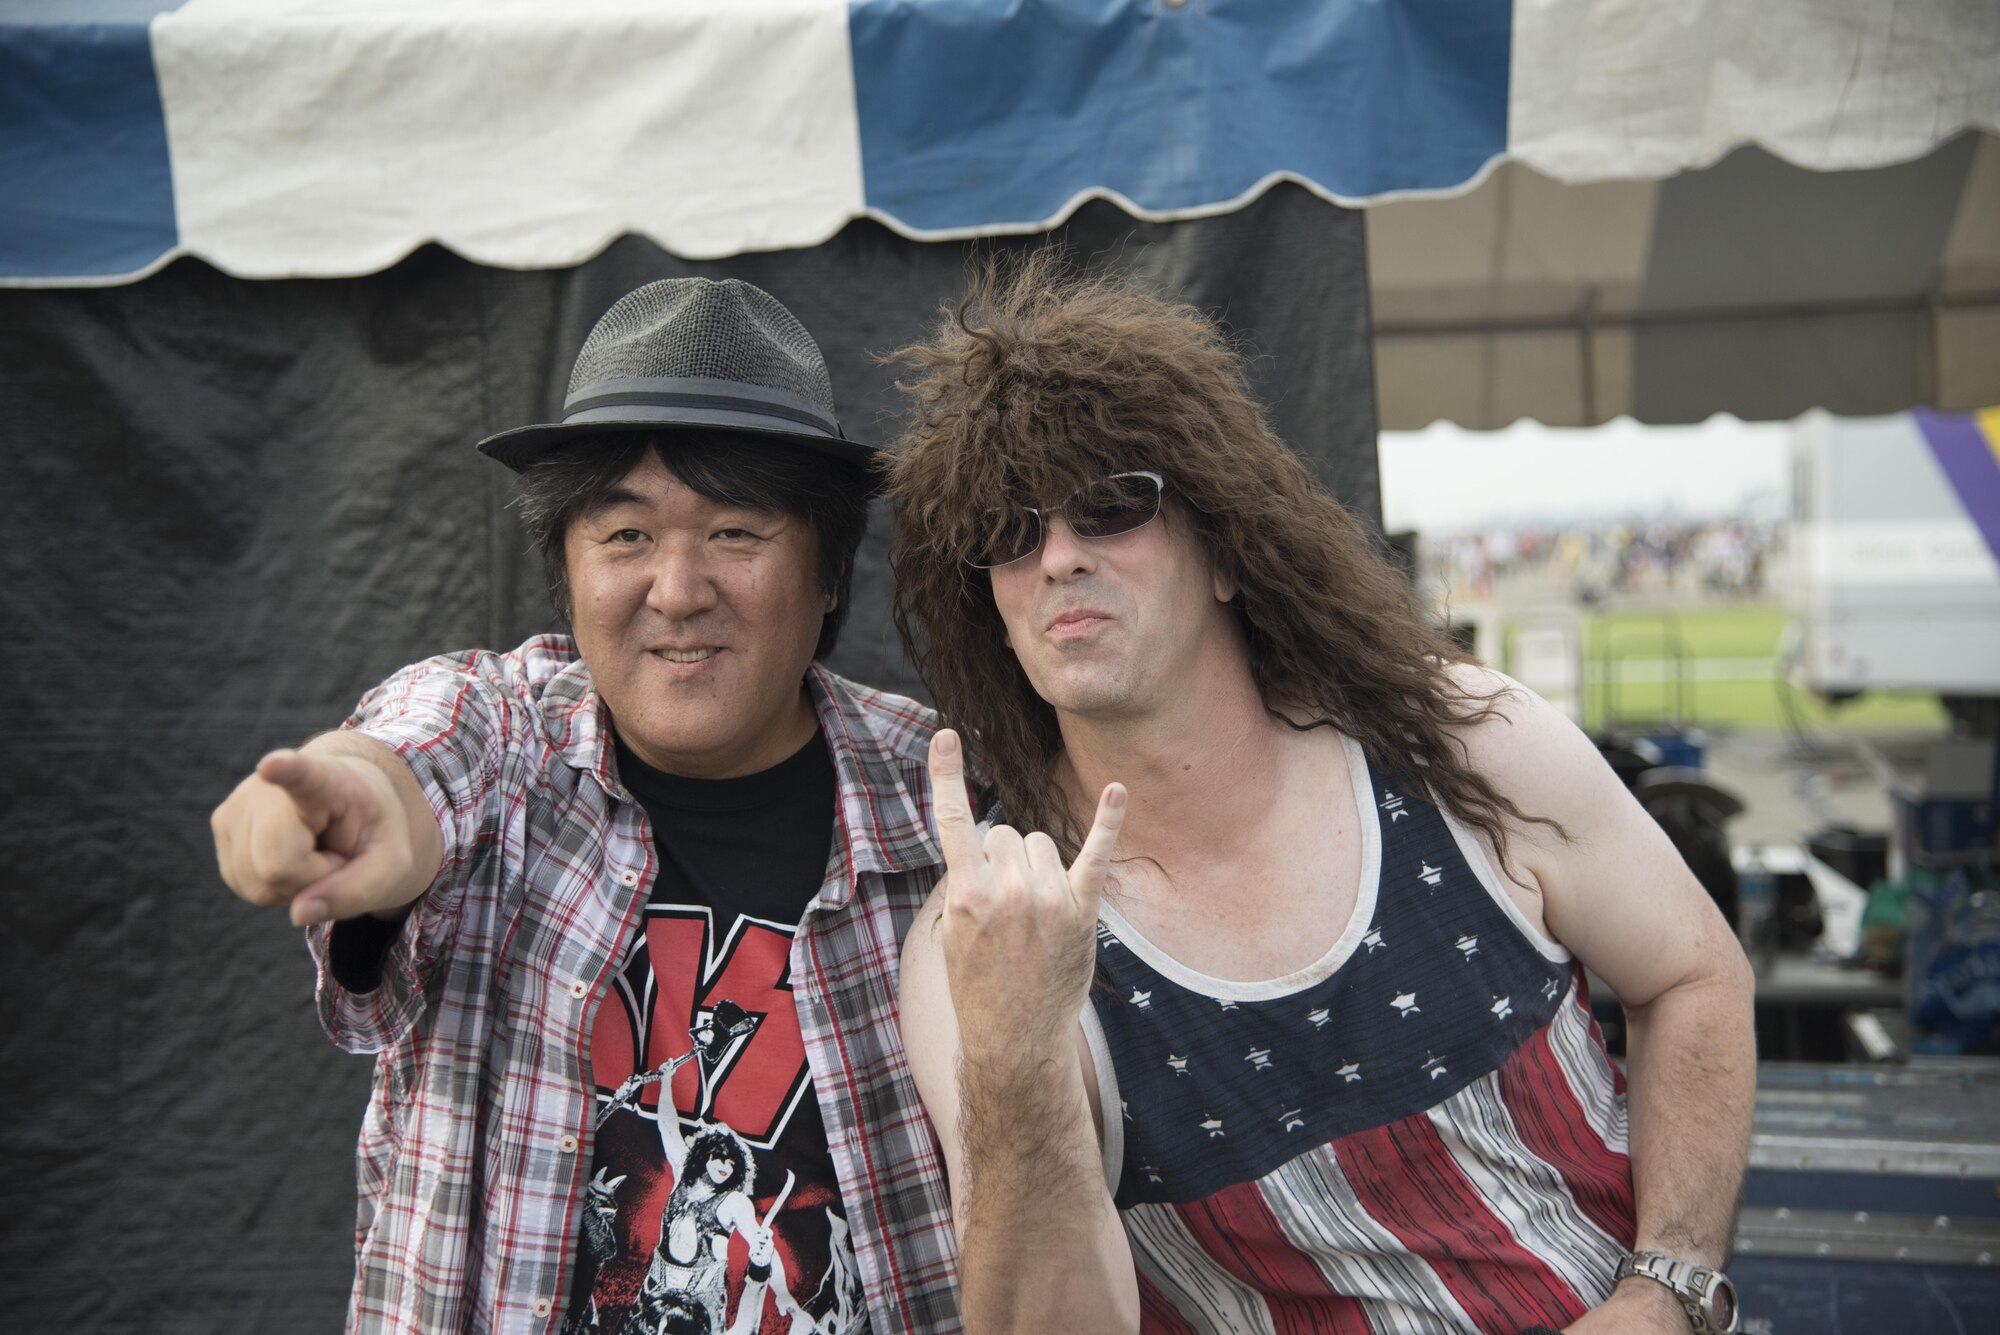 Andy Litchfield, lead singer of a Bon Jovi tribute band, poses for a picture during the 2016 Friendship Festival at Yokota Air Base, Japan, Sept. 17, 2016. The two-day Friendship Festival features bands, aircraft displays, food vendors and other performances. (U.S. Air Force photo by Staff Sgt. Michael Washburn/Released)